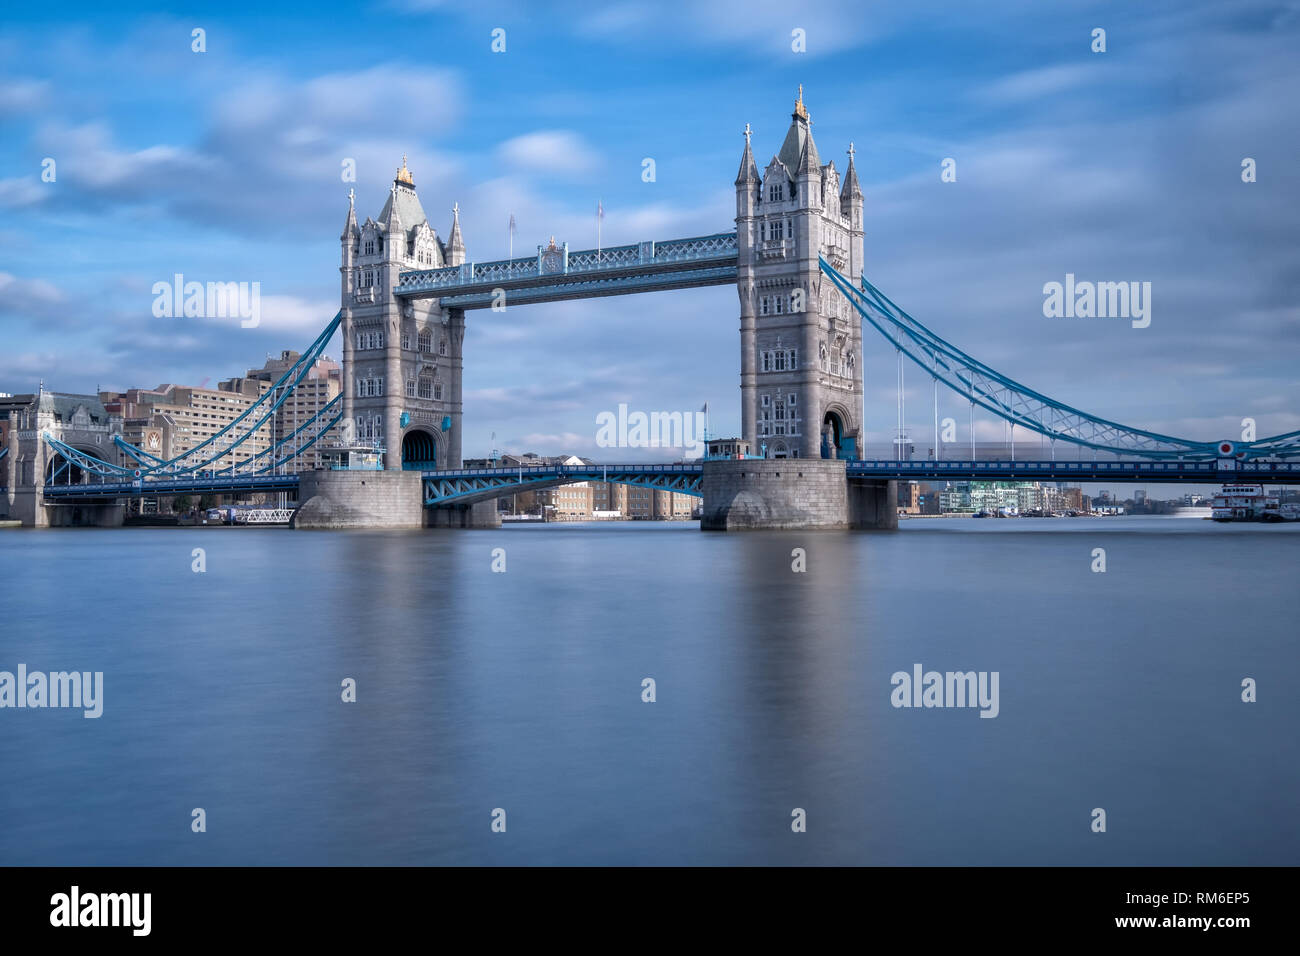 A twenty second exposure, taken of Tower Bridge, England, to smooth out the water of the English River Thames Also, to make the traffic less visible. Stock Photo